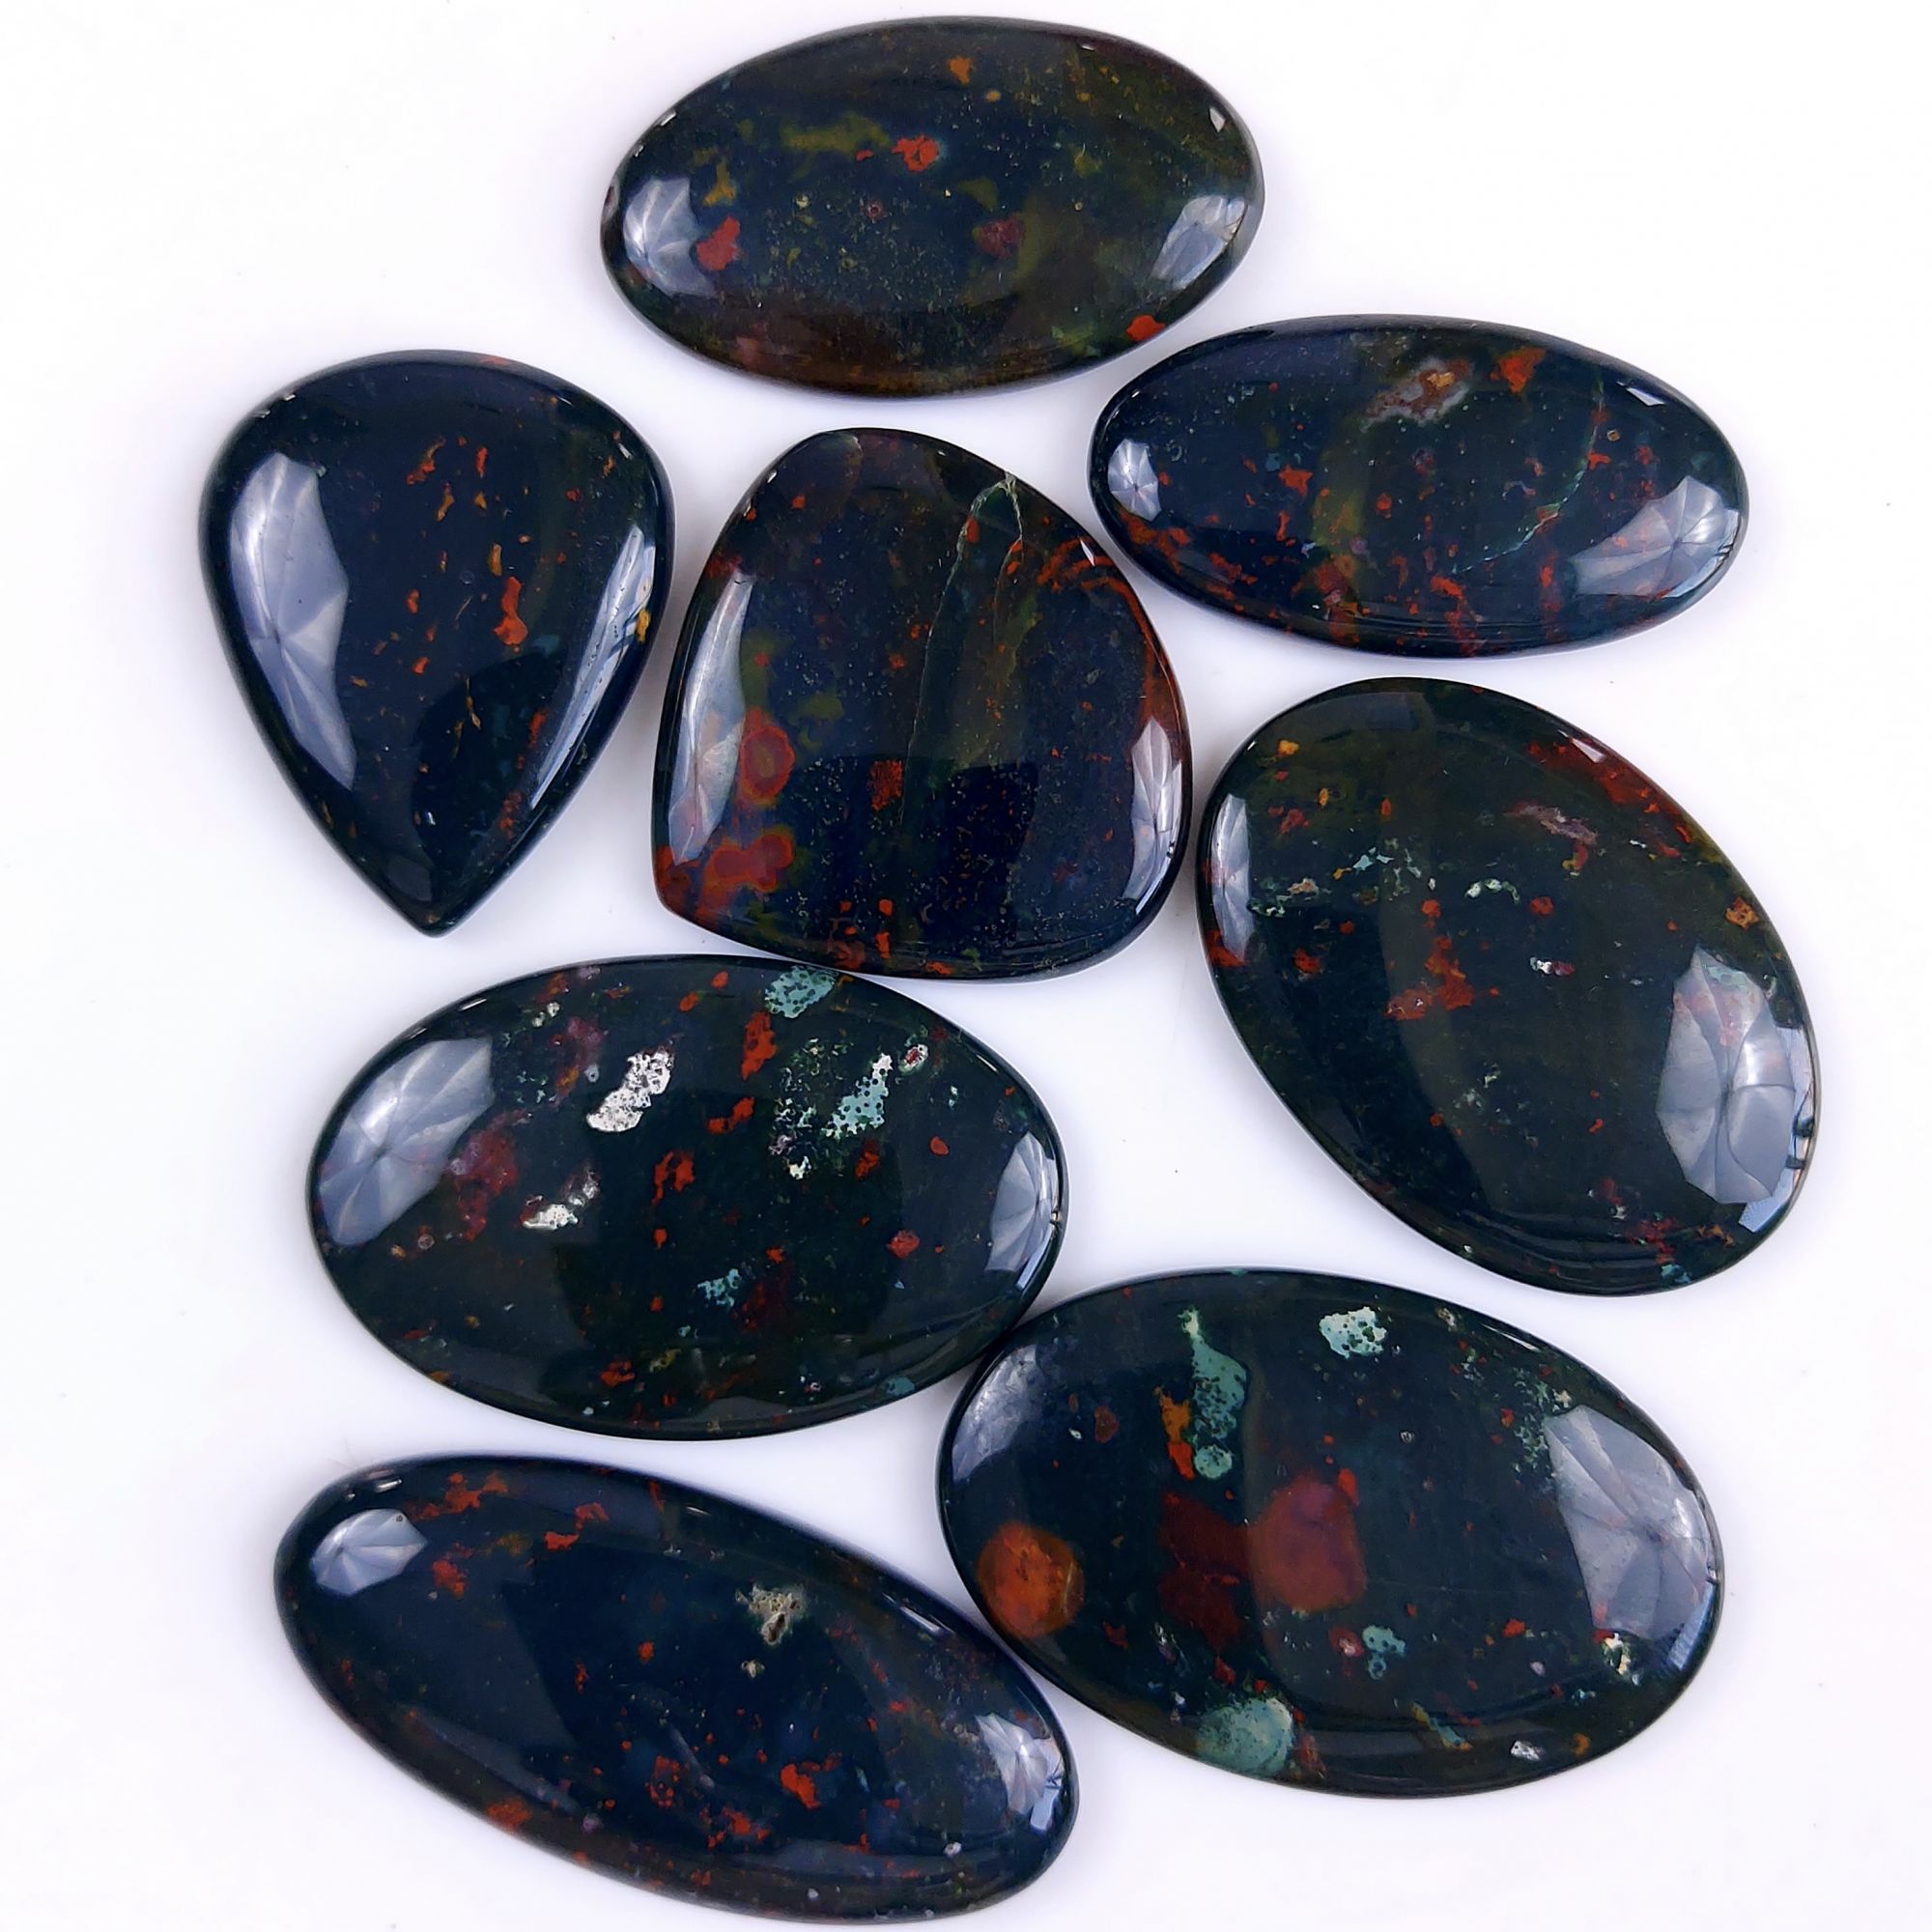 8Pcs 451Cts  Natural Green Blood Stone Loose Cabochon Gemstone Lot For Jewelry Making Gift For Her 50x23 37x29 mm#926